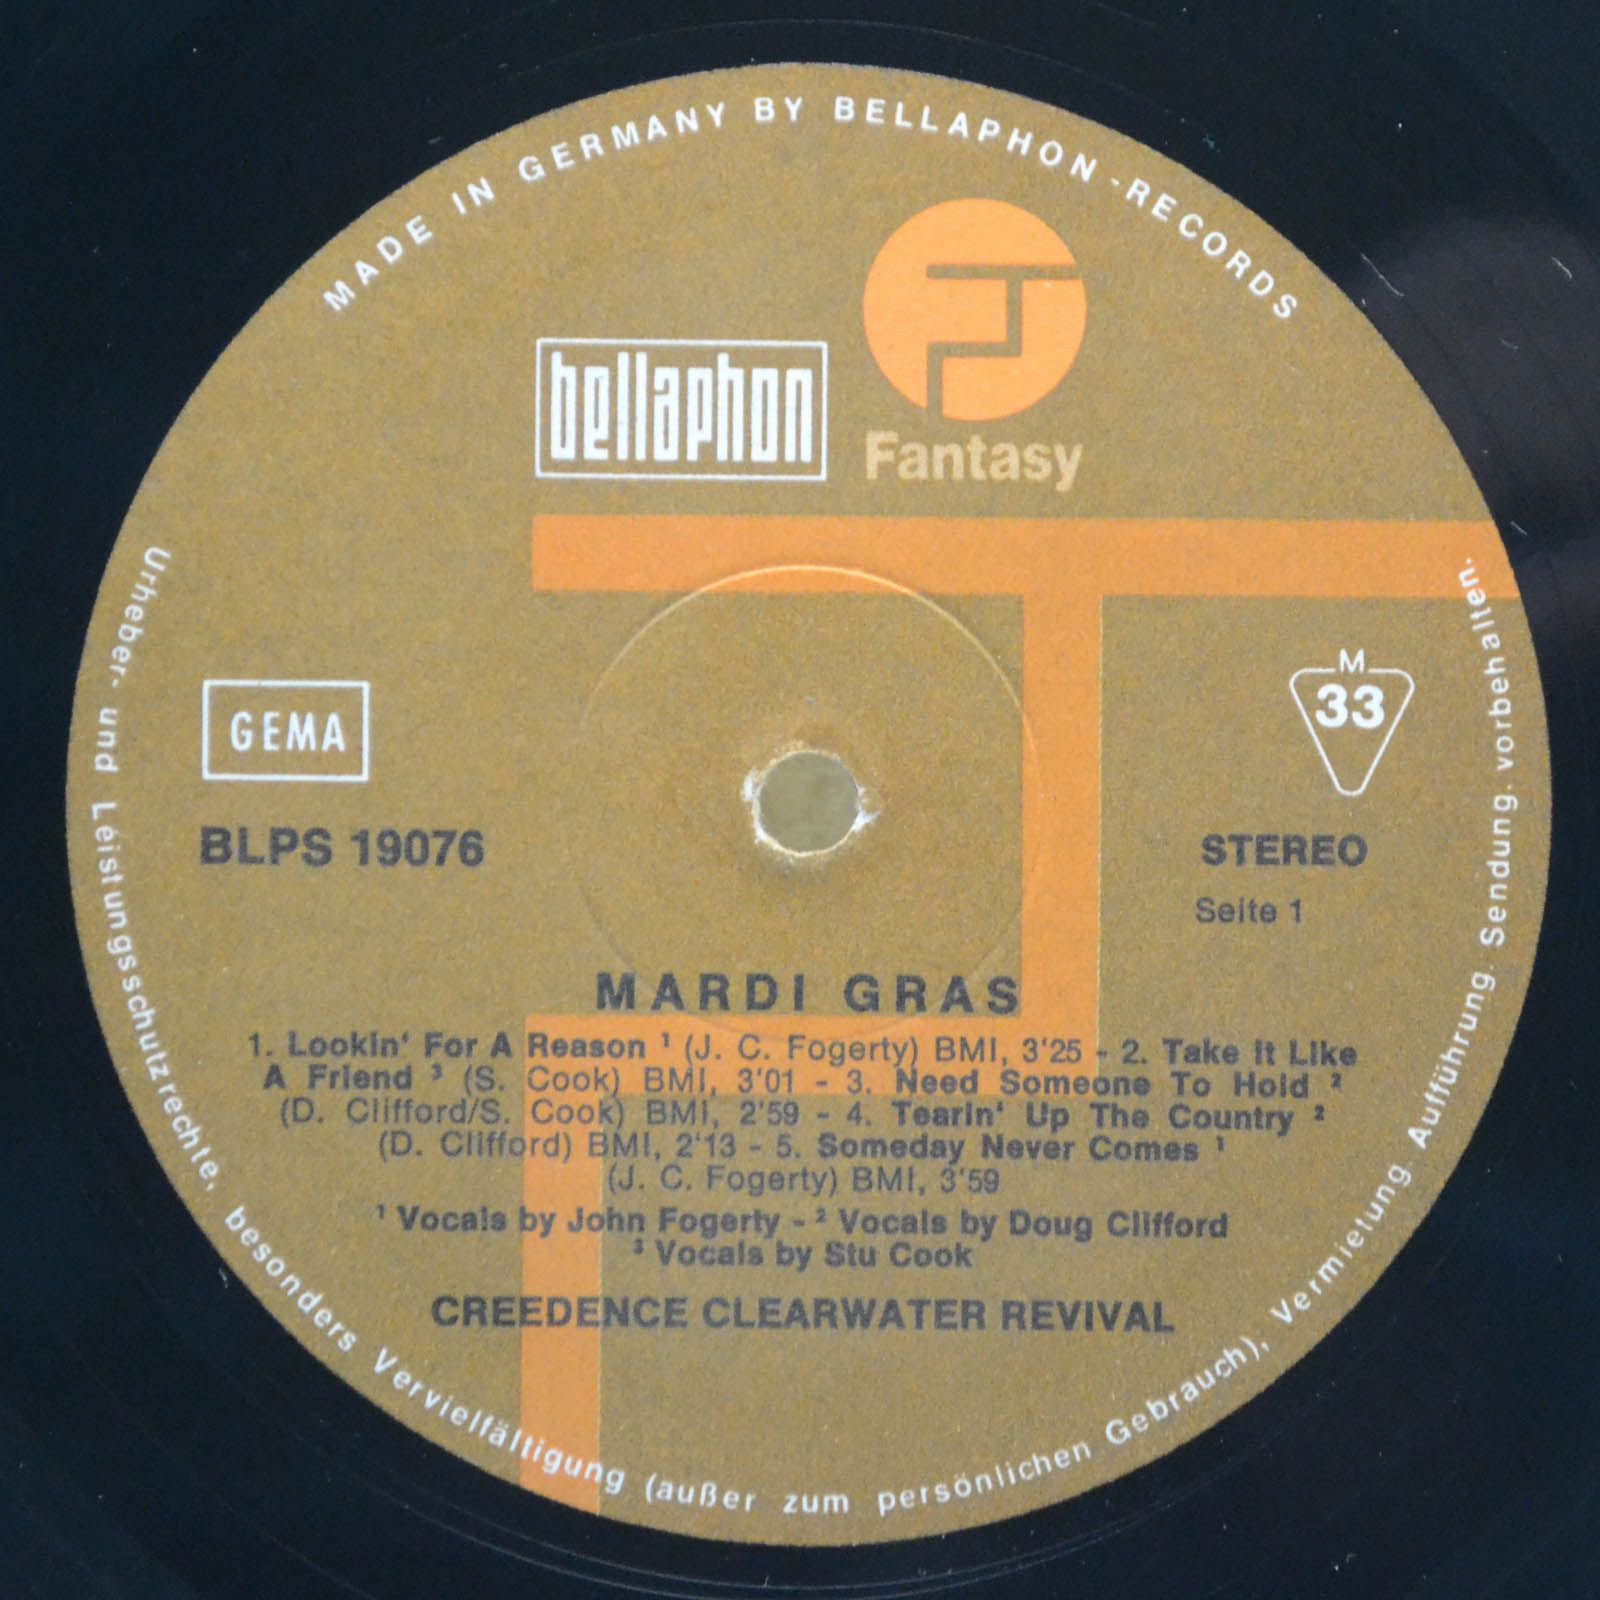 Creedence Clearwater Revival — Mardi Gras, 1972